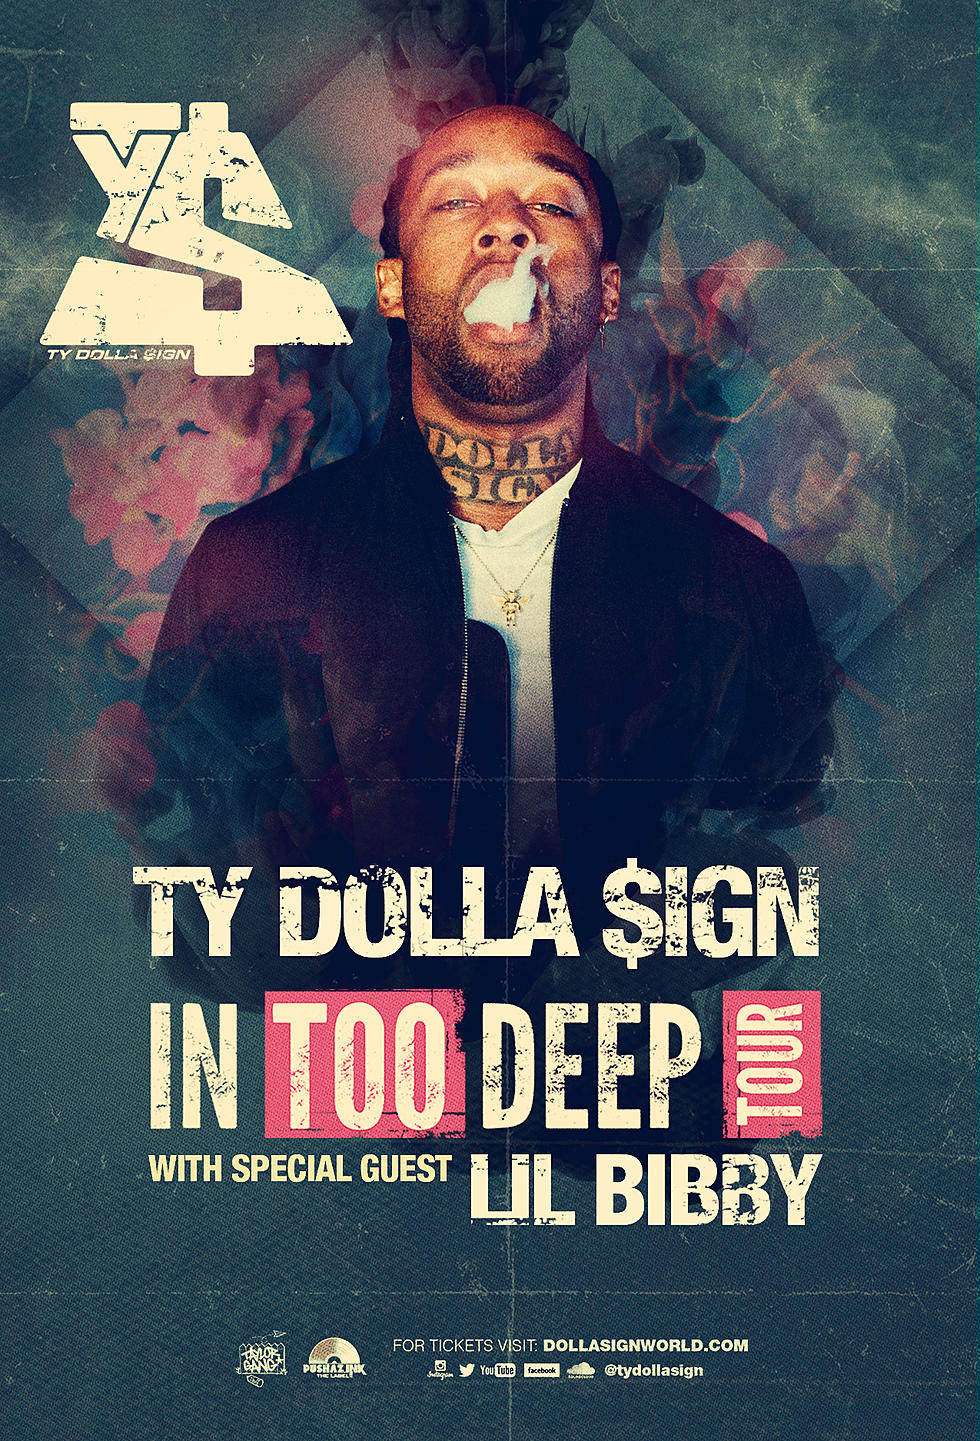 Win Tickets To See Ty Dolla $ign In Your City For His In Too Deep Tour